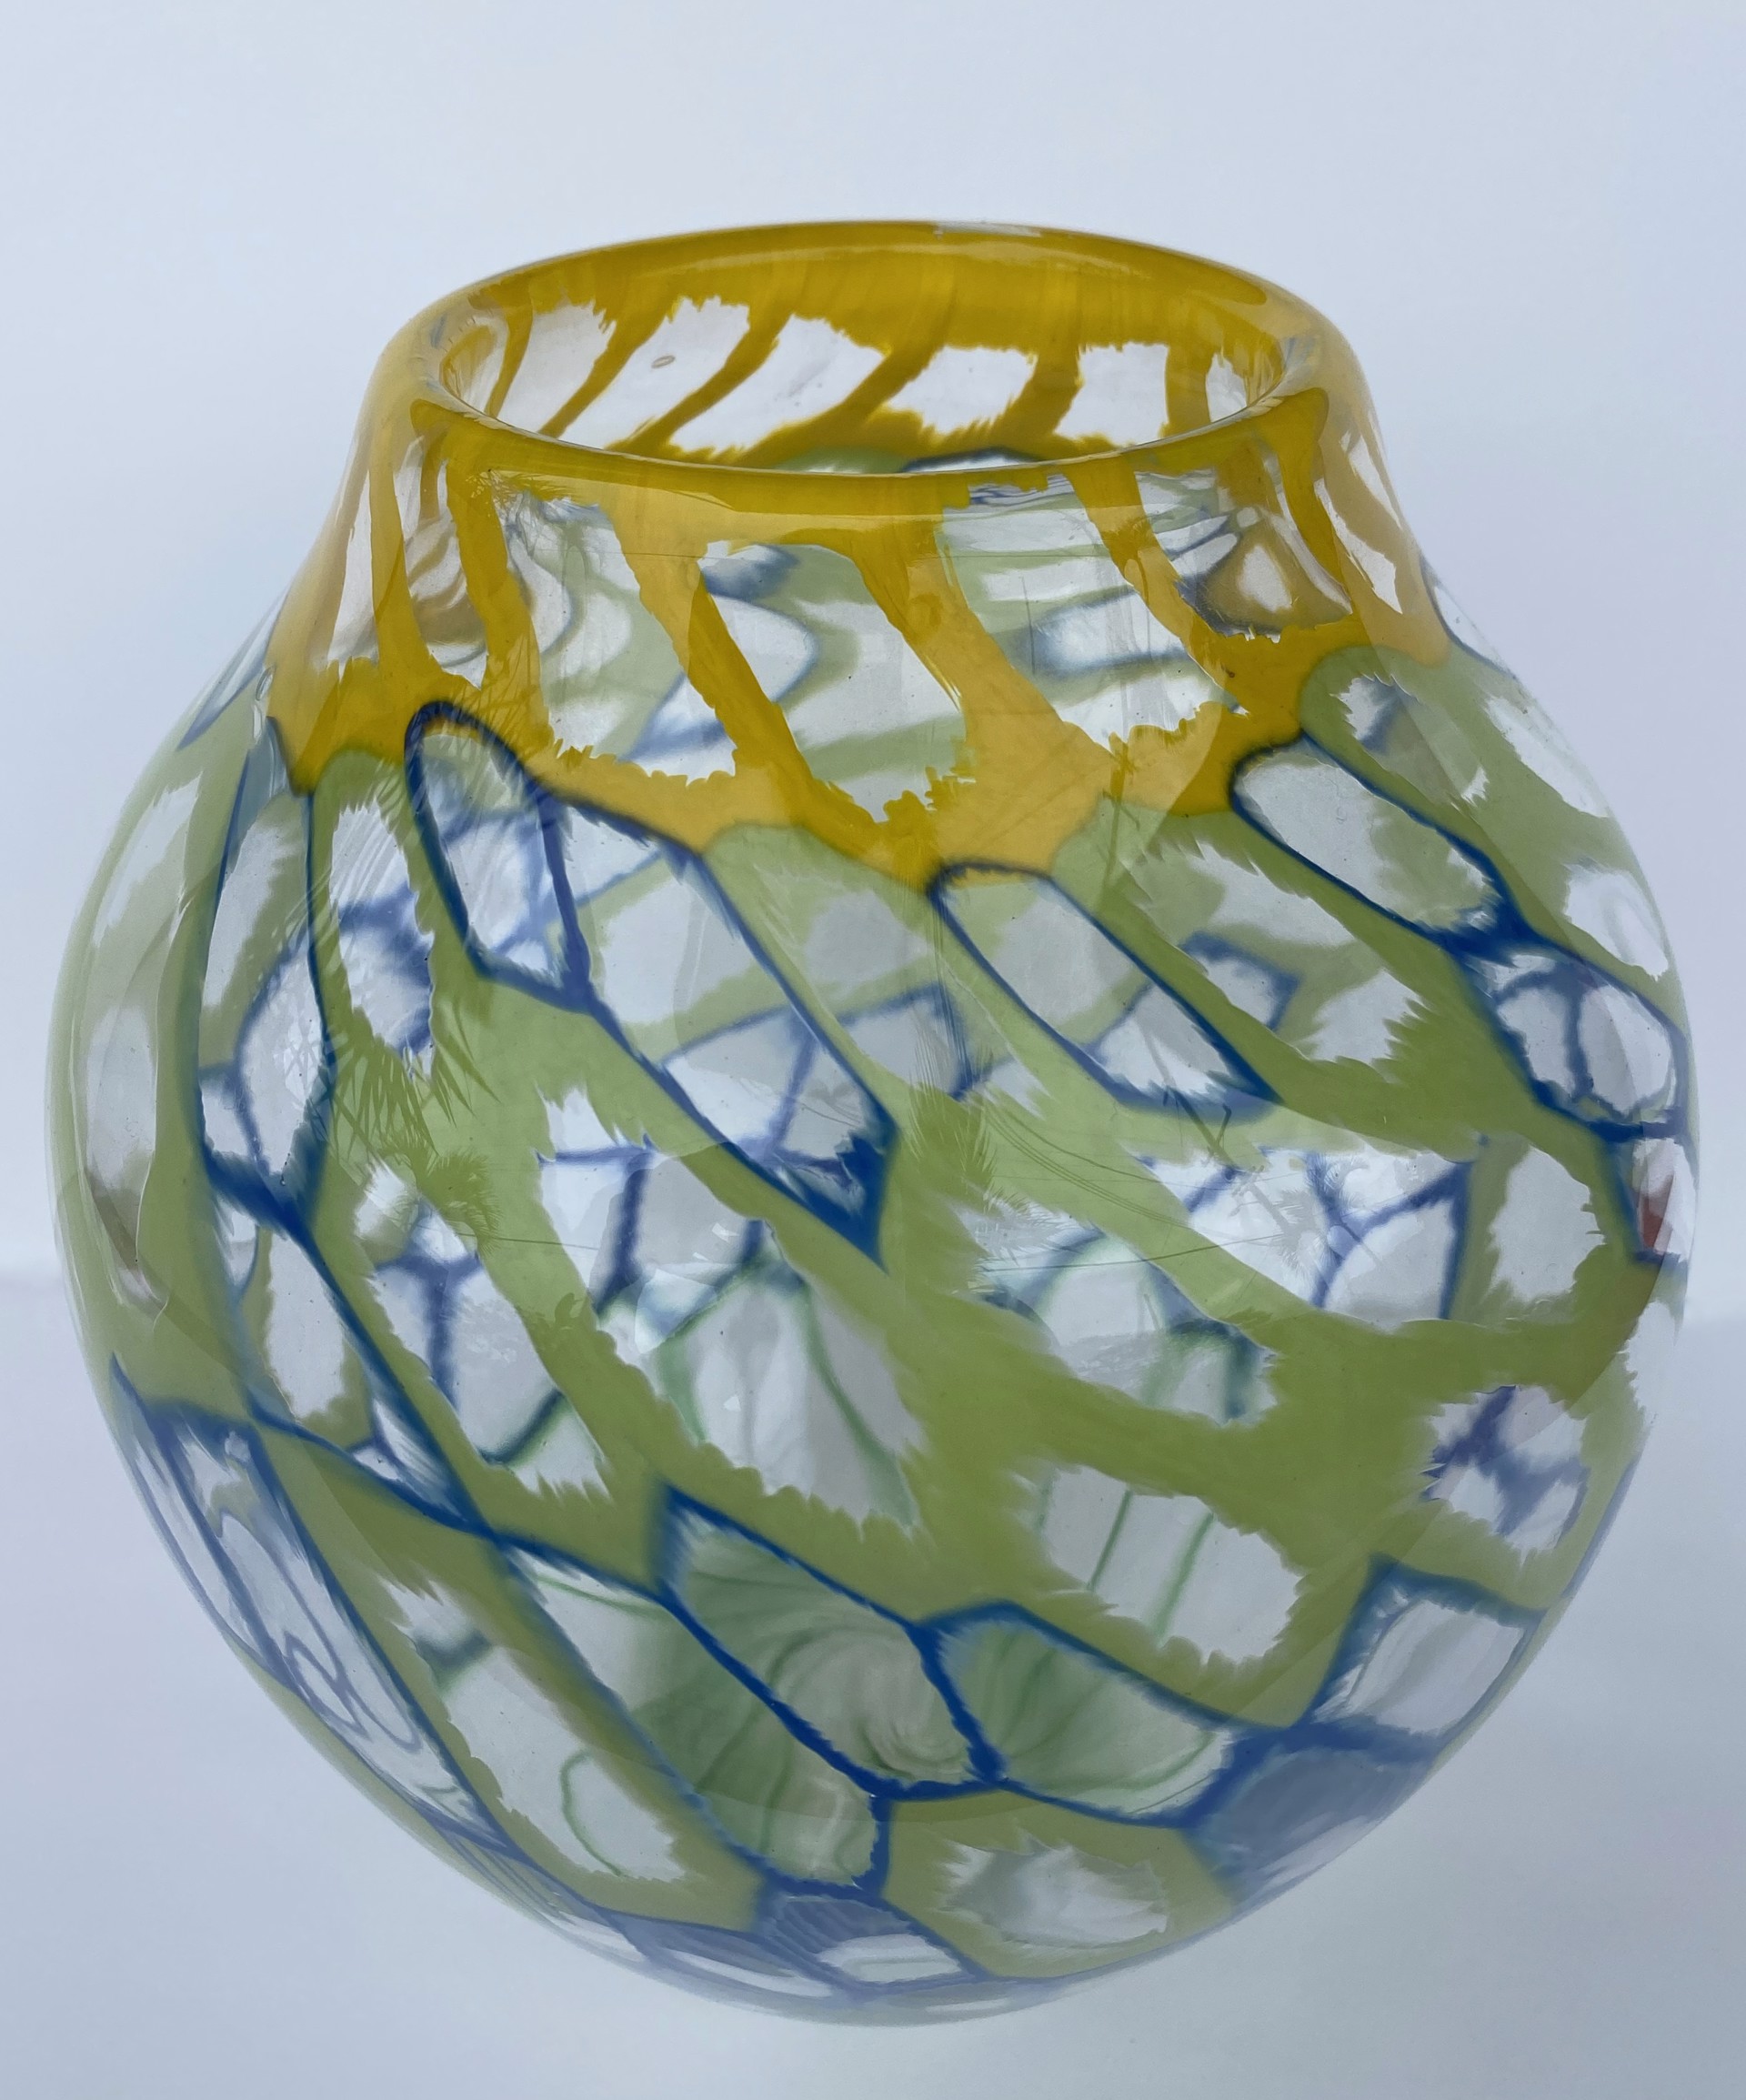 Yellow, Green and Blue Murrini Vase by Daniel Wooddell